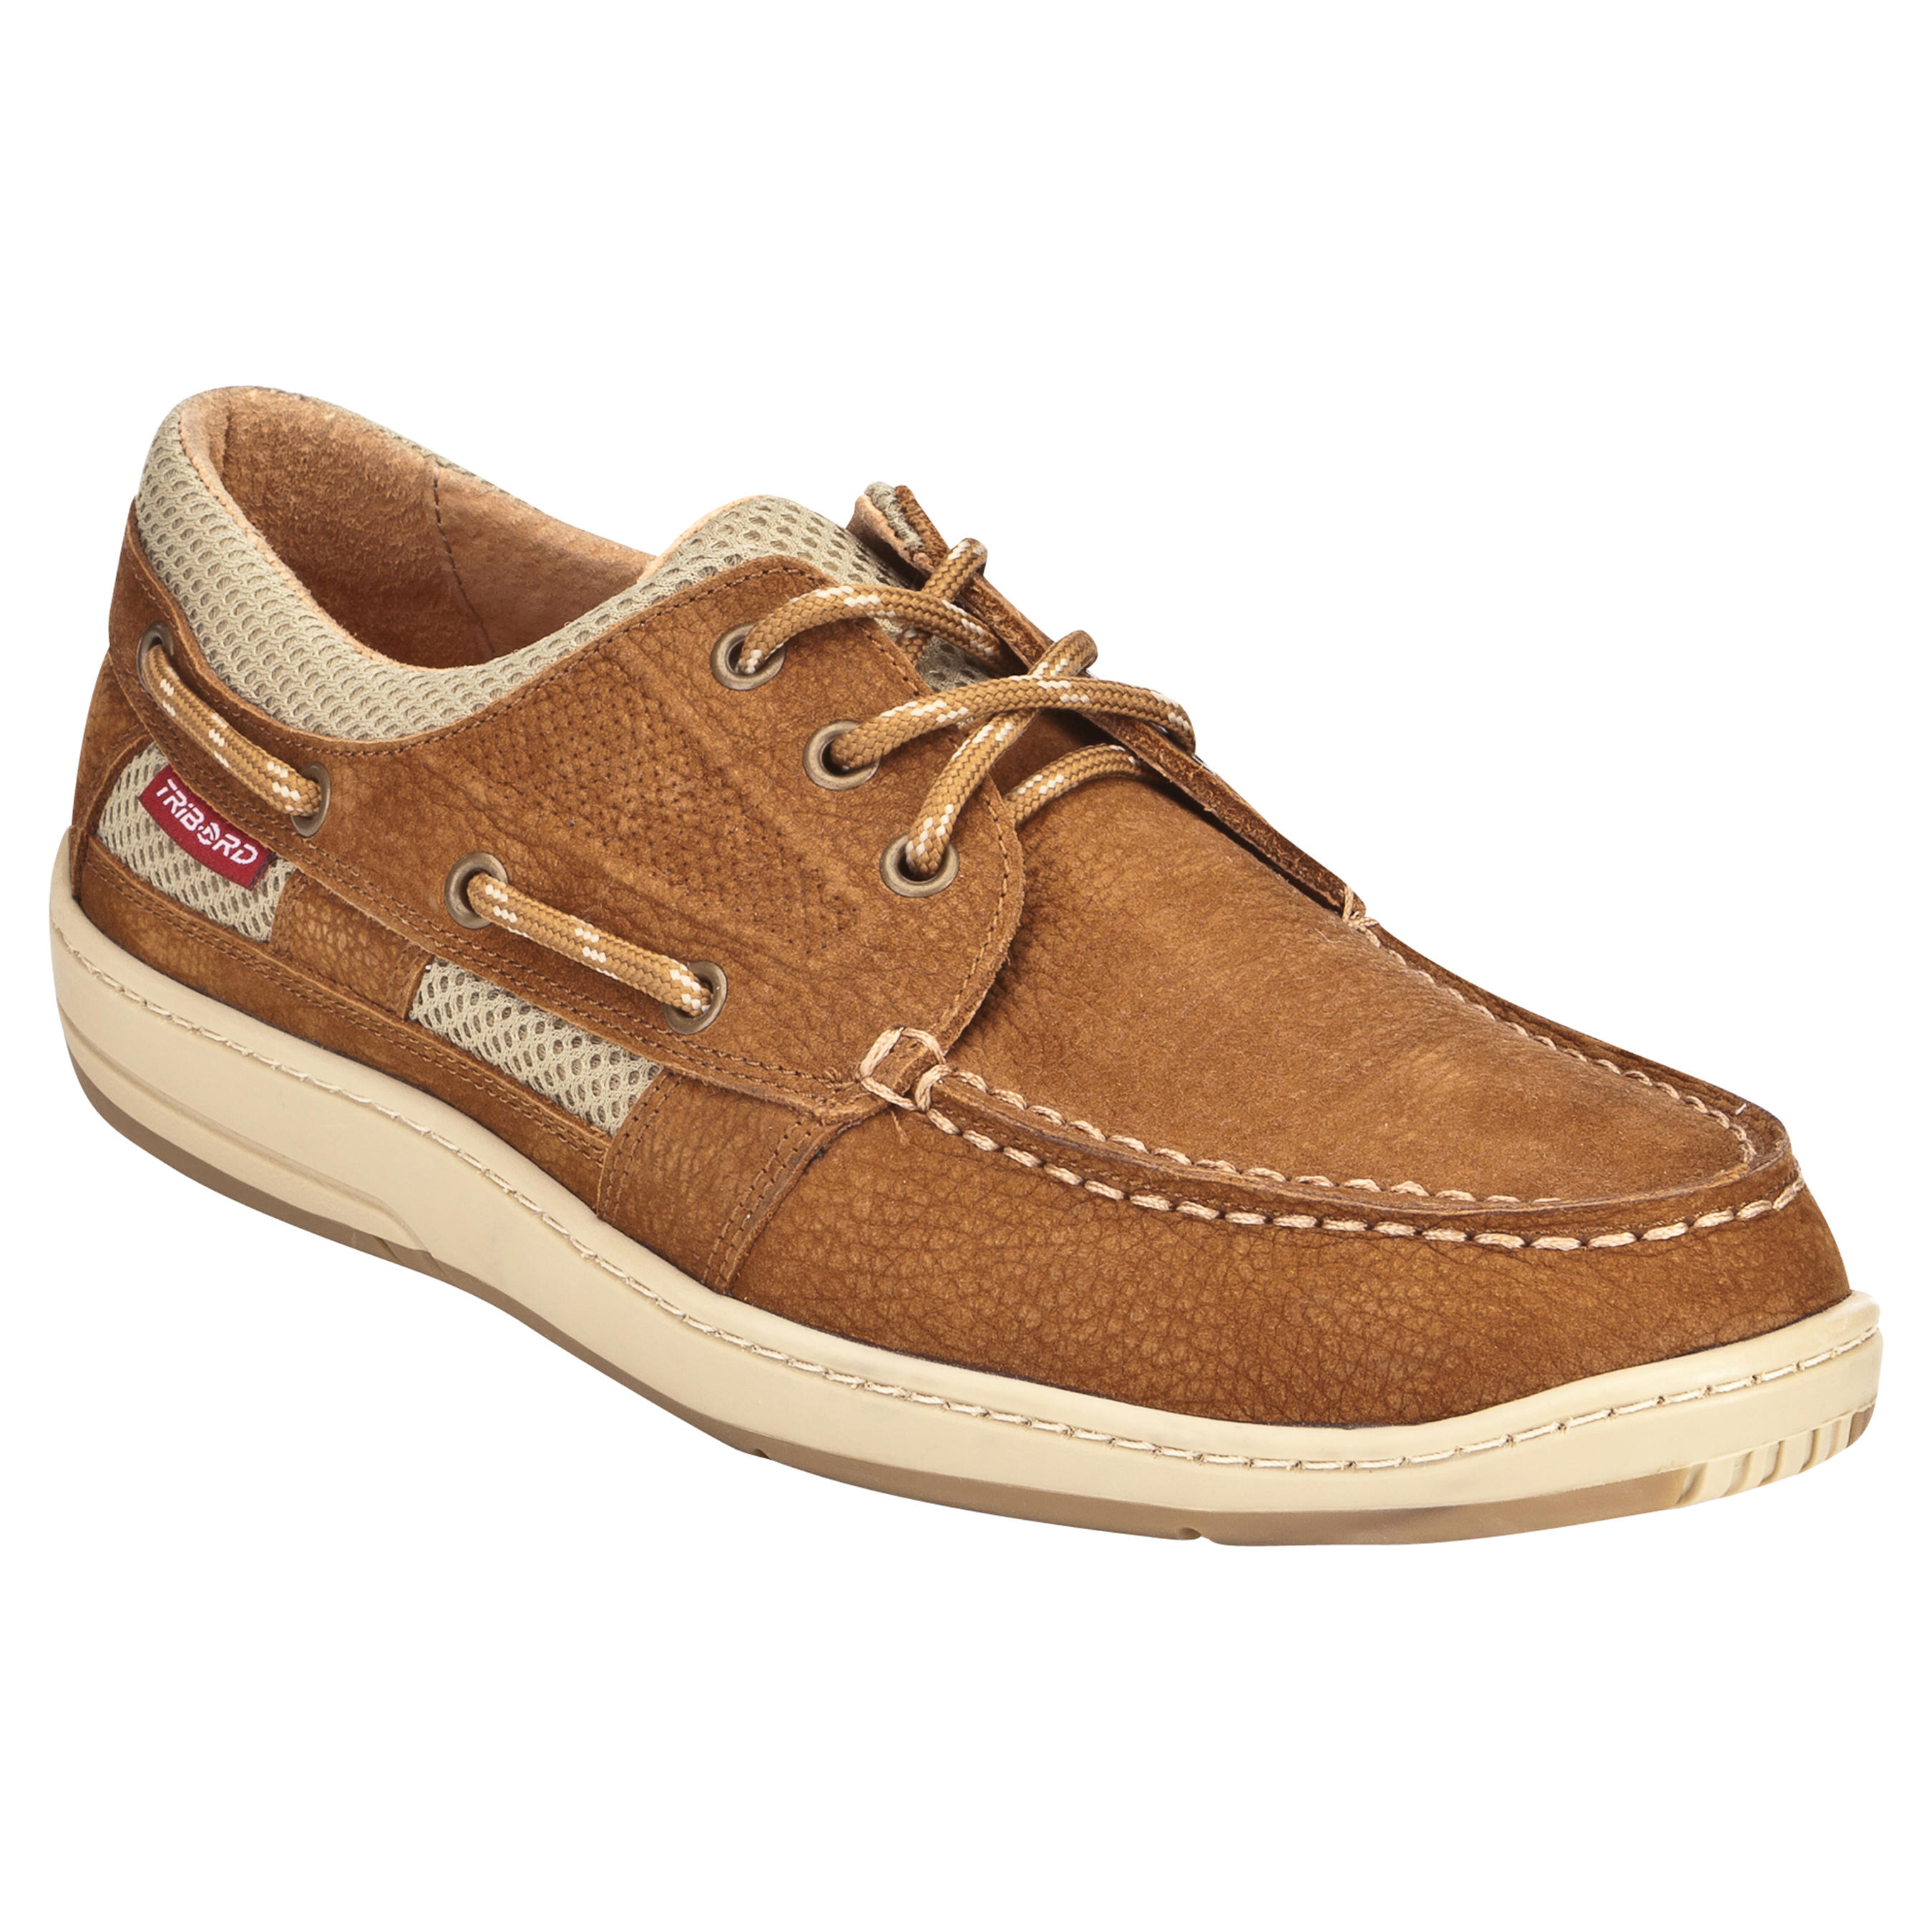 TRIBORD CLIPPER men's boat shoes - Brown